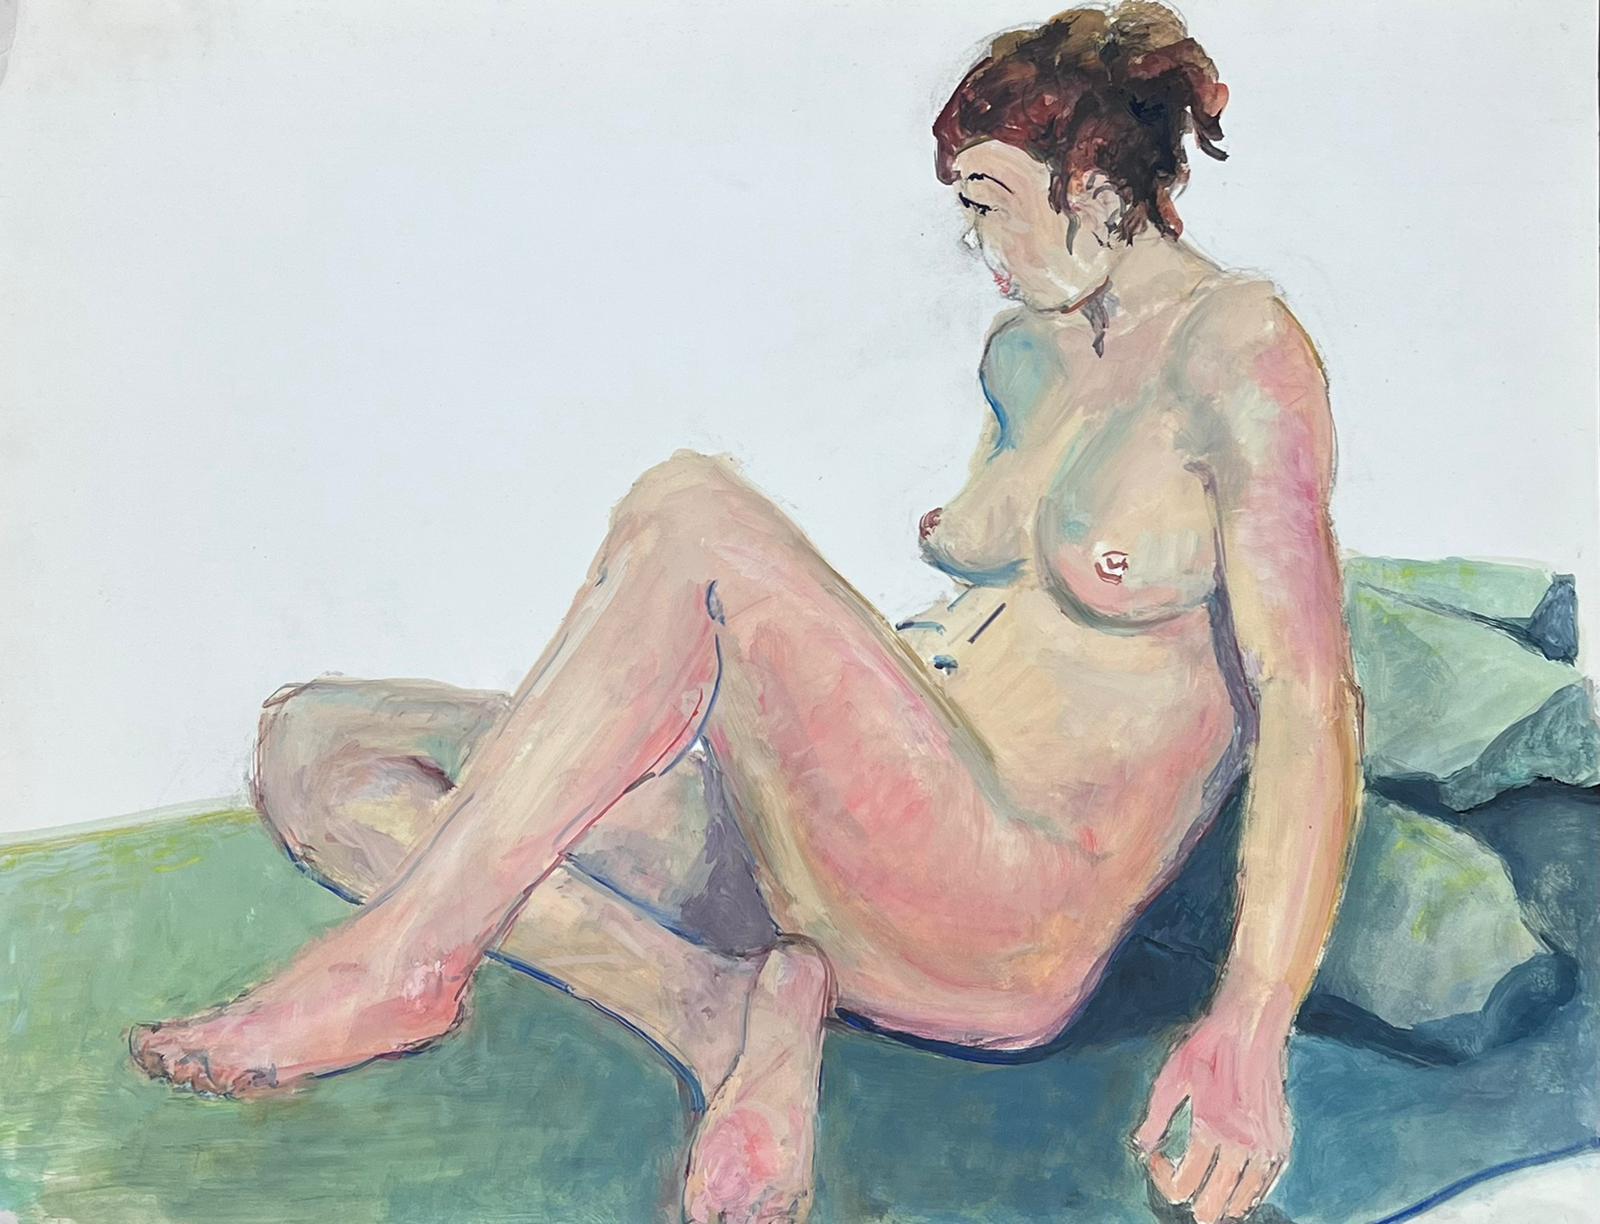 The Artists Model
Nude Lady Model
French School, circa 1970's 
oil painting on card, unframed
size: 19.75 x 25.5 inches
condition: overall very good, a very few light markings to the surface but nothing detrimental to the appeal and appearance of